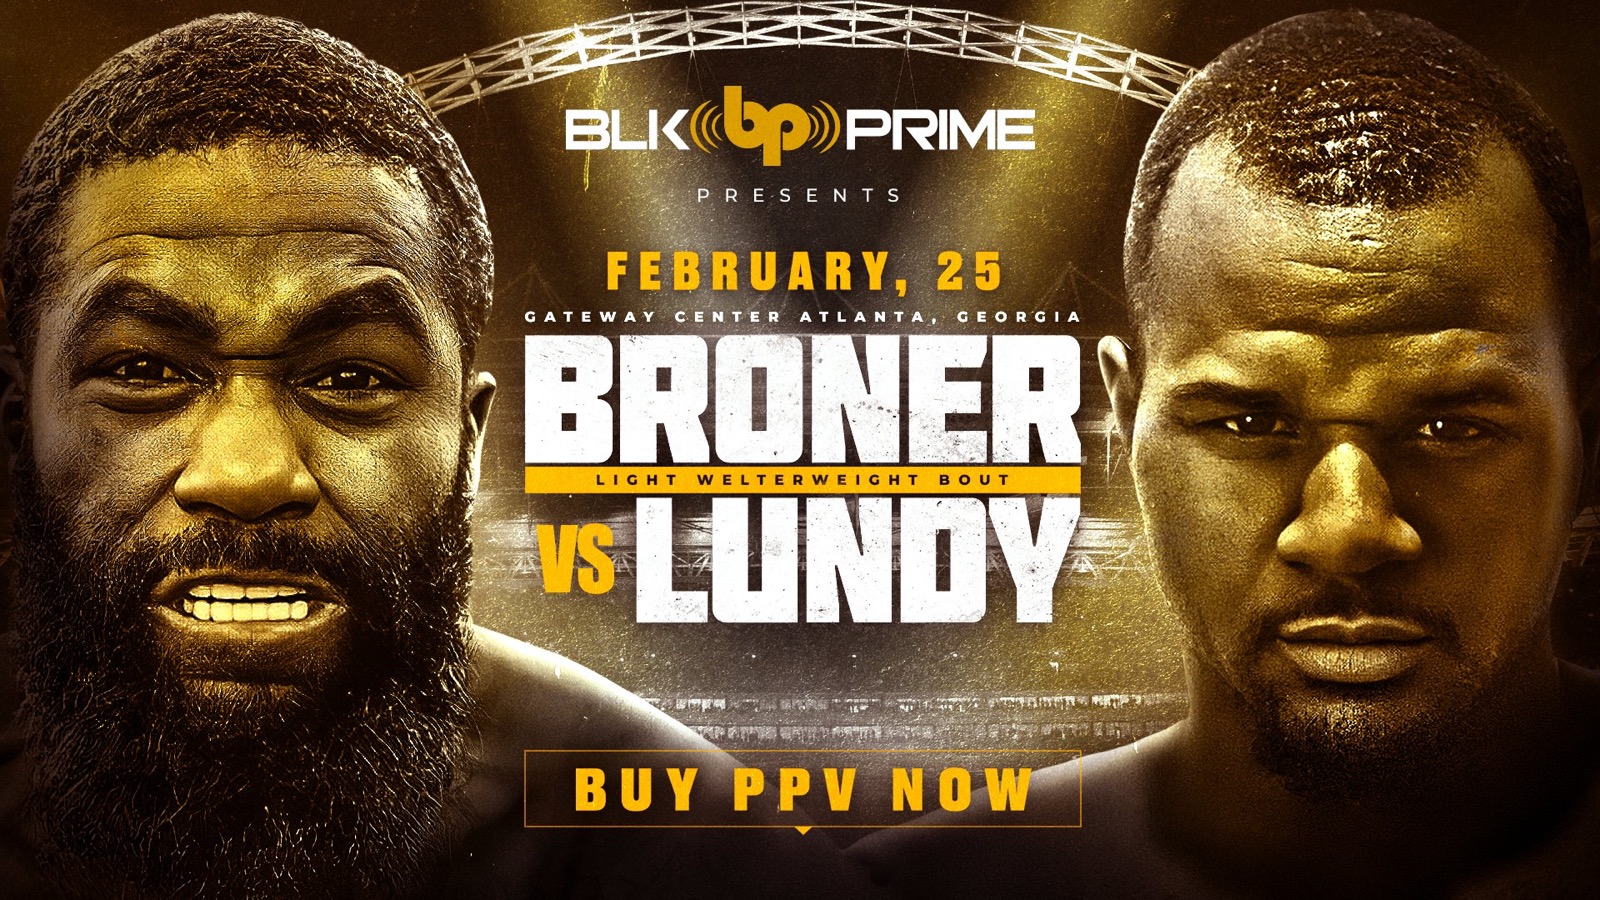 Adrien Broner facing Hank Lundy on Feb.25th on BLK Prime PPV